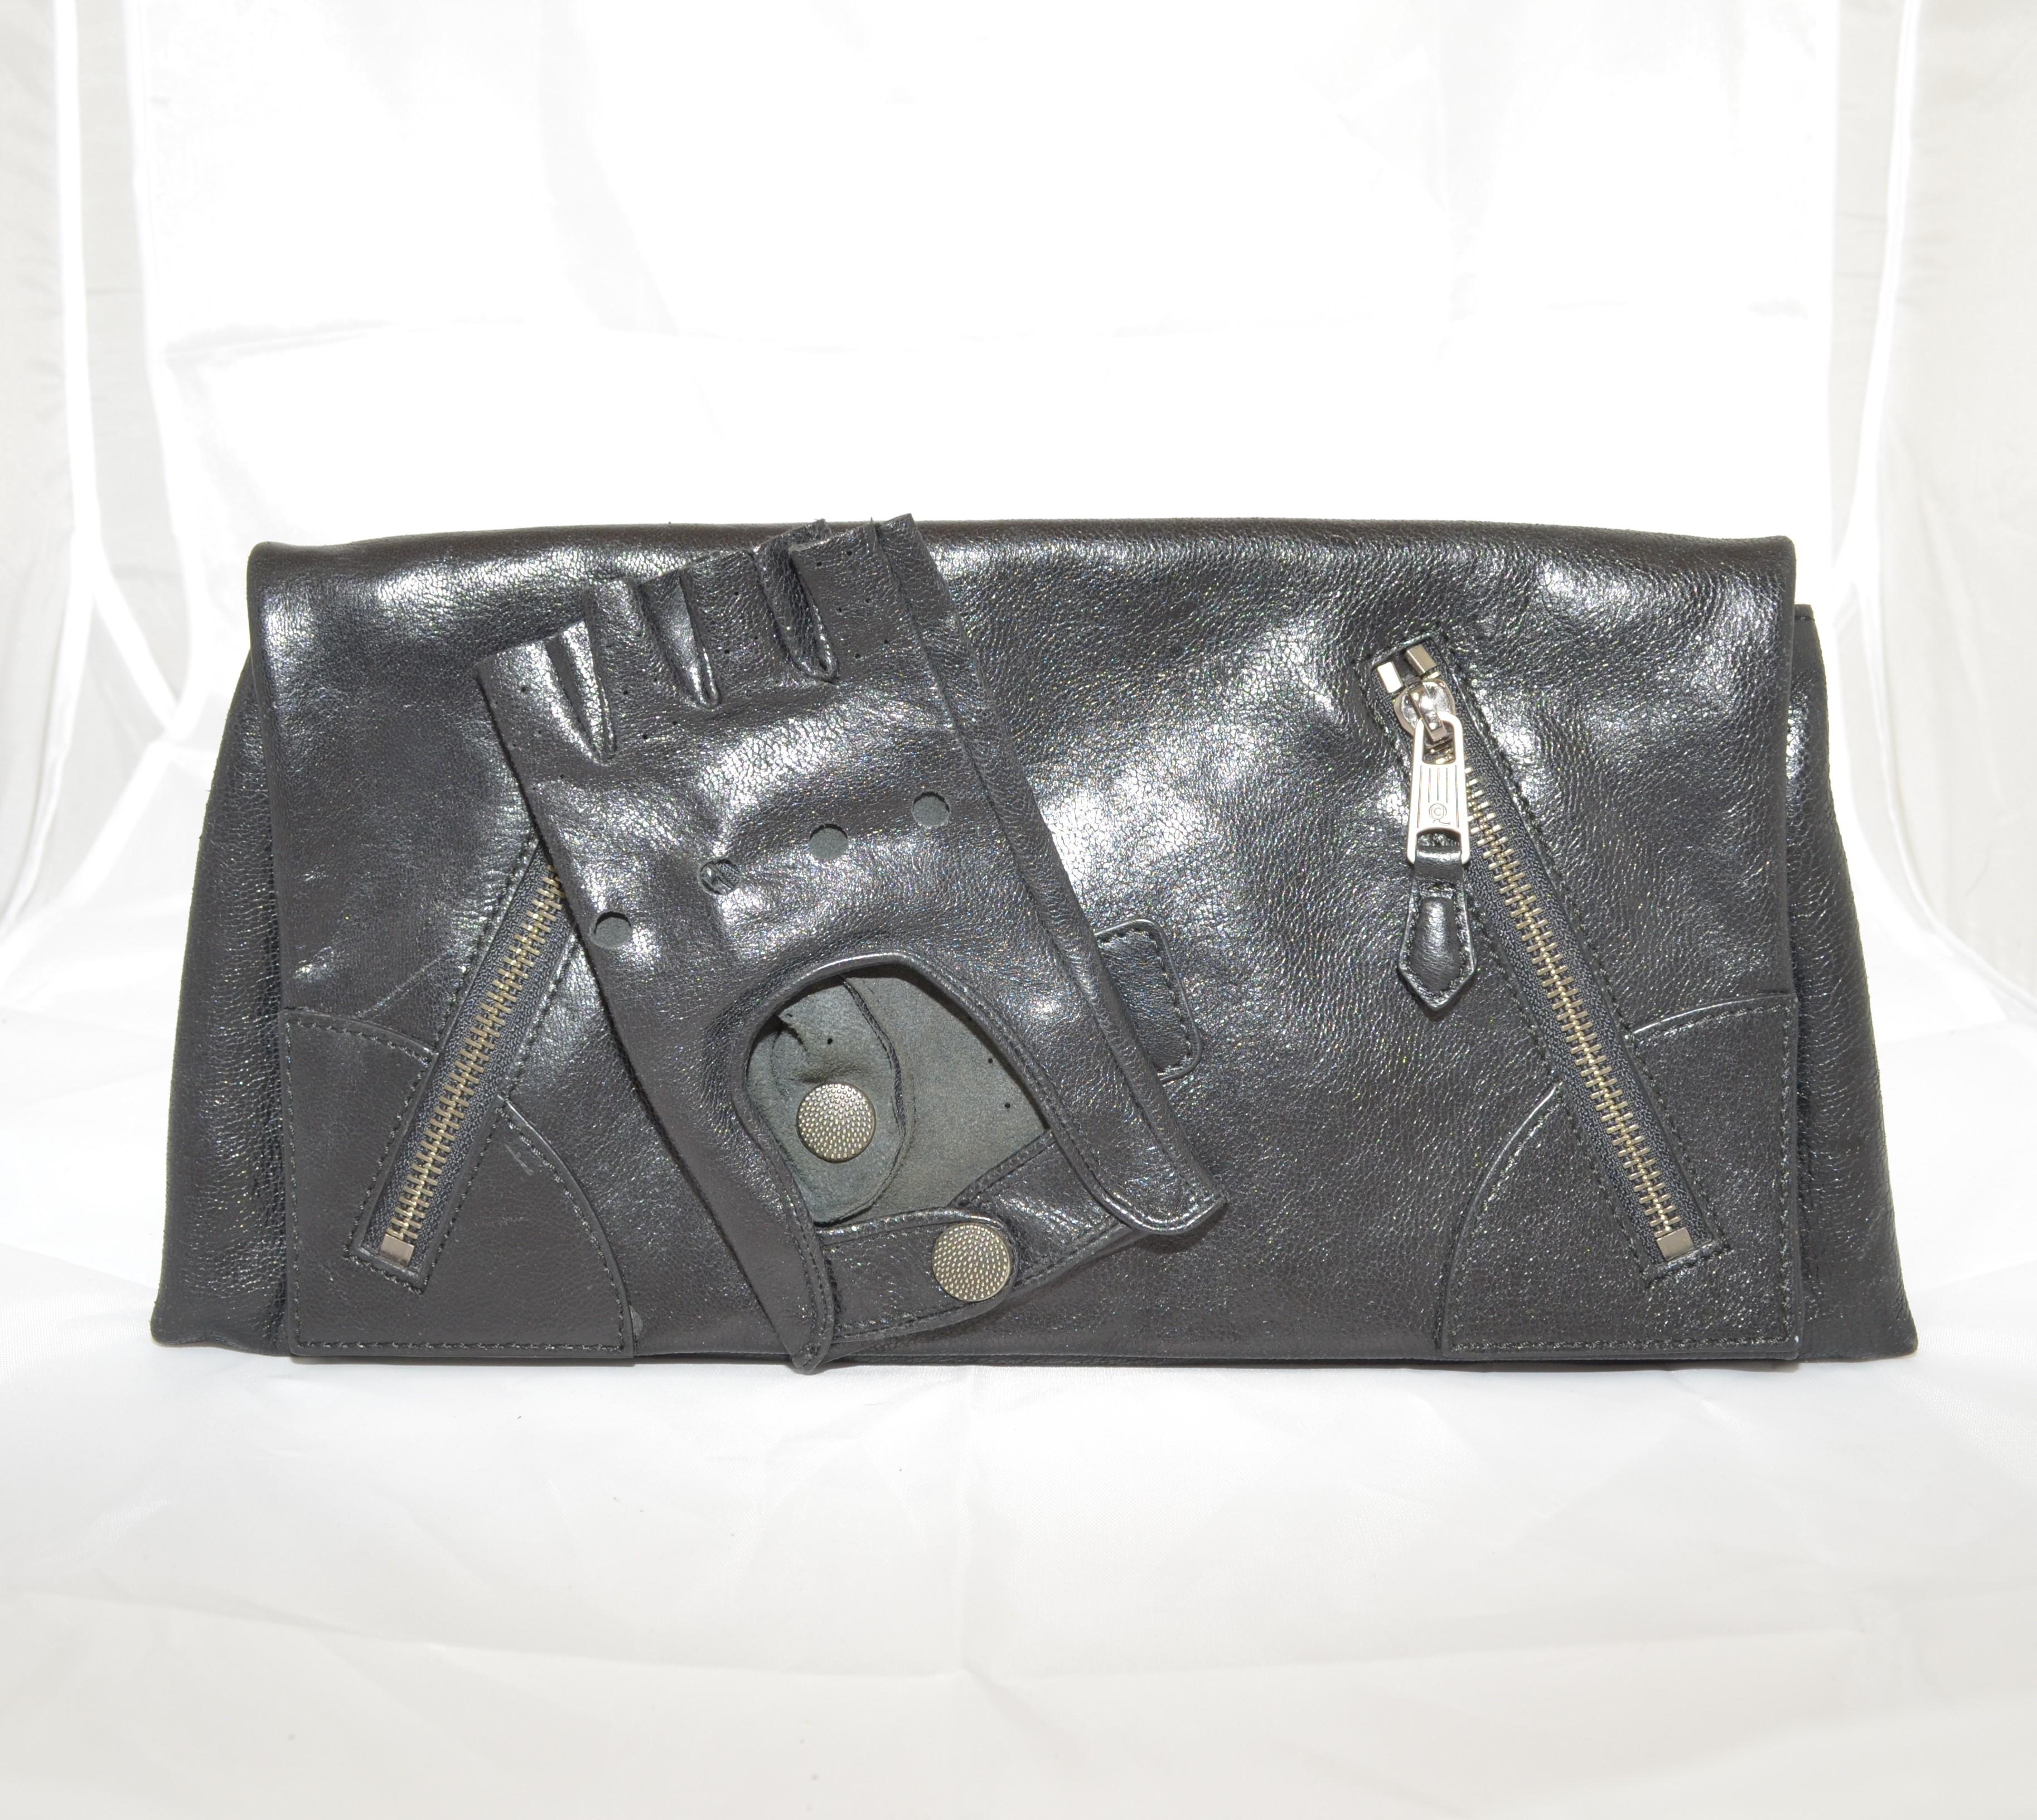 ALEXANDER MCQUEEN Calfskin Faithful Glove Clutch in black is crafted of semi-distressed calfskin leather in a fold-over style with diagonal zippers at the front.

Measurements:

Measurements: 13” x 6”